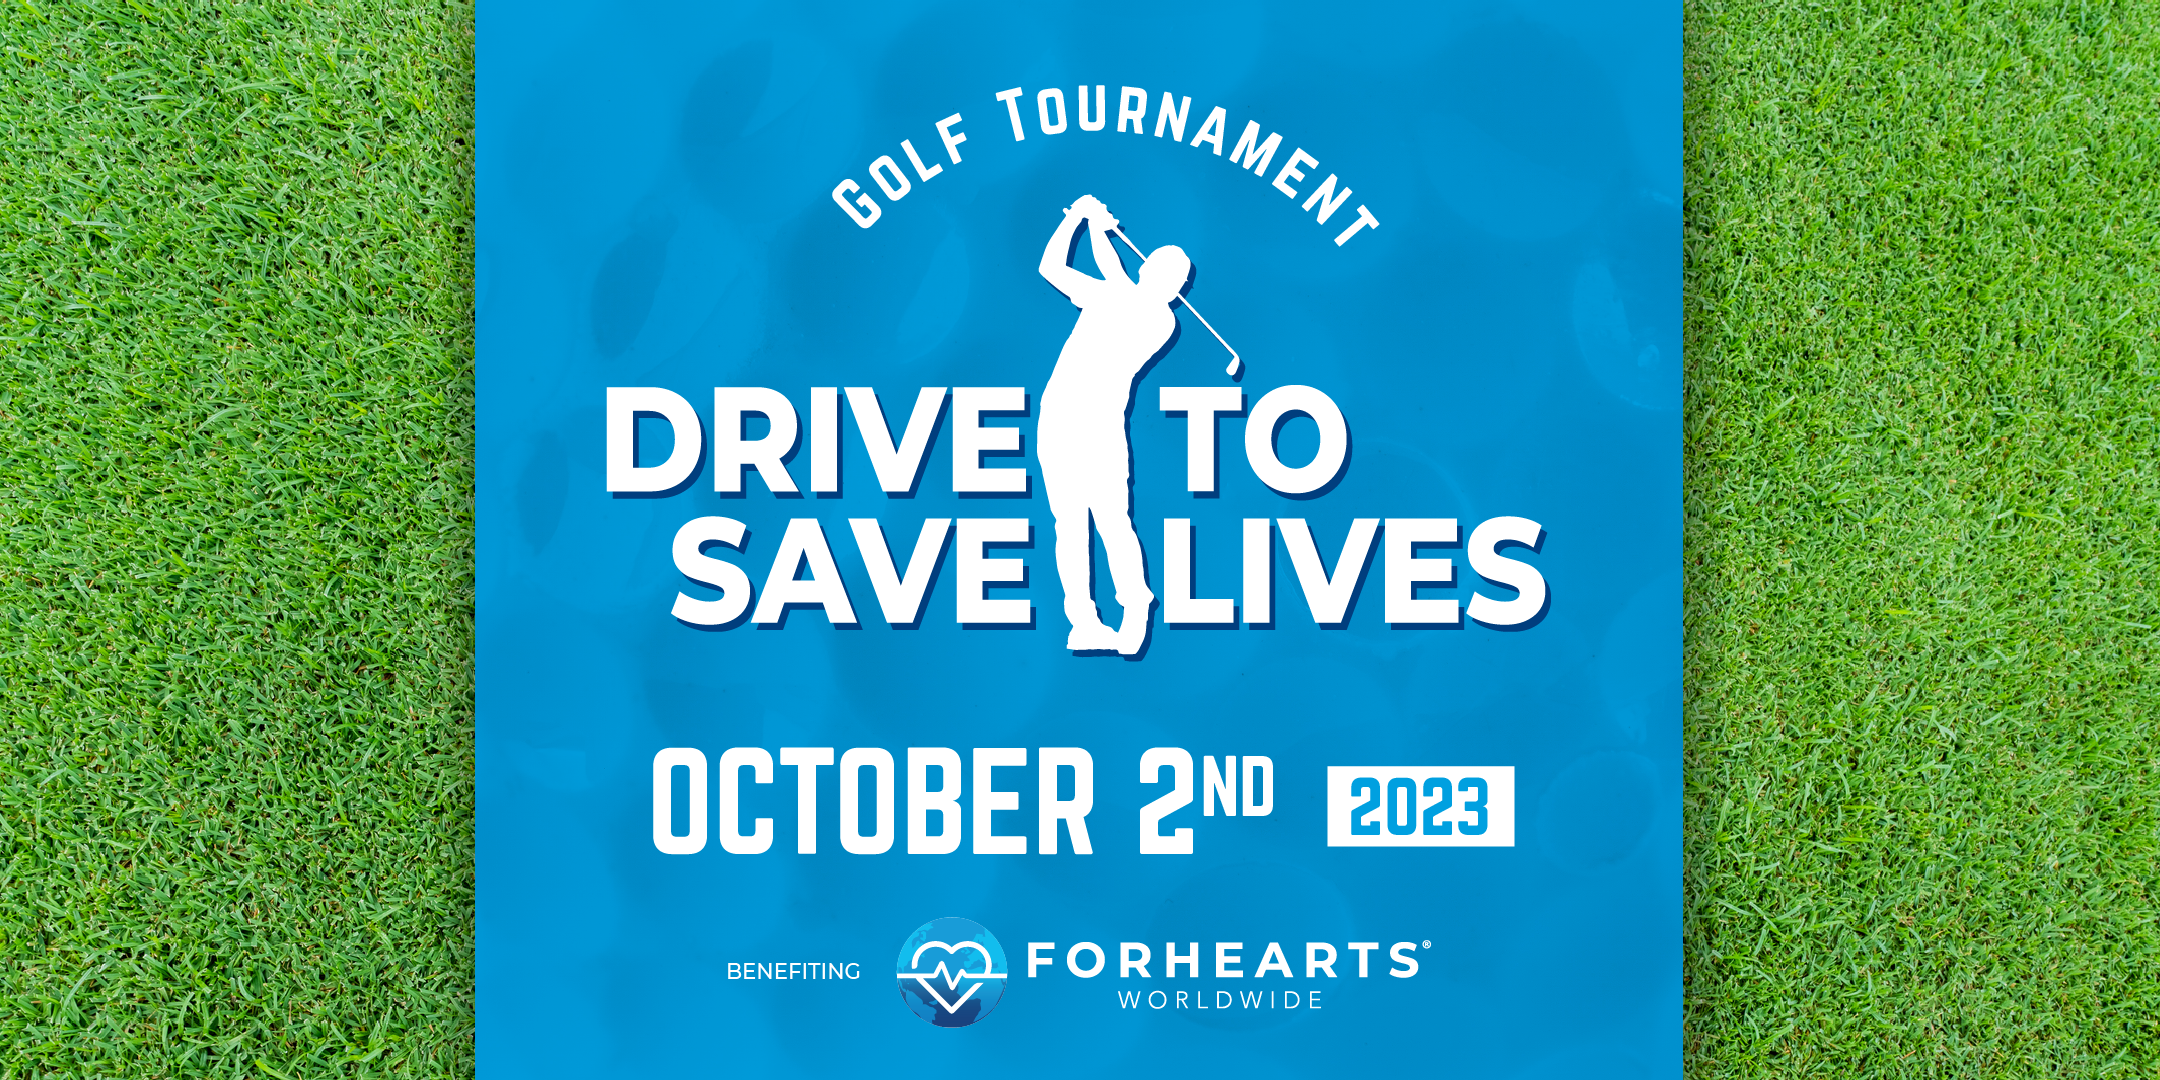 2023 Annual Drive To Save Lives Charity Golf Tournament